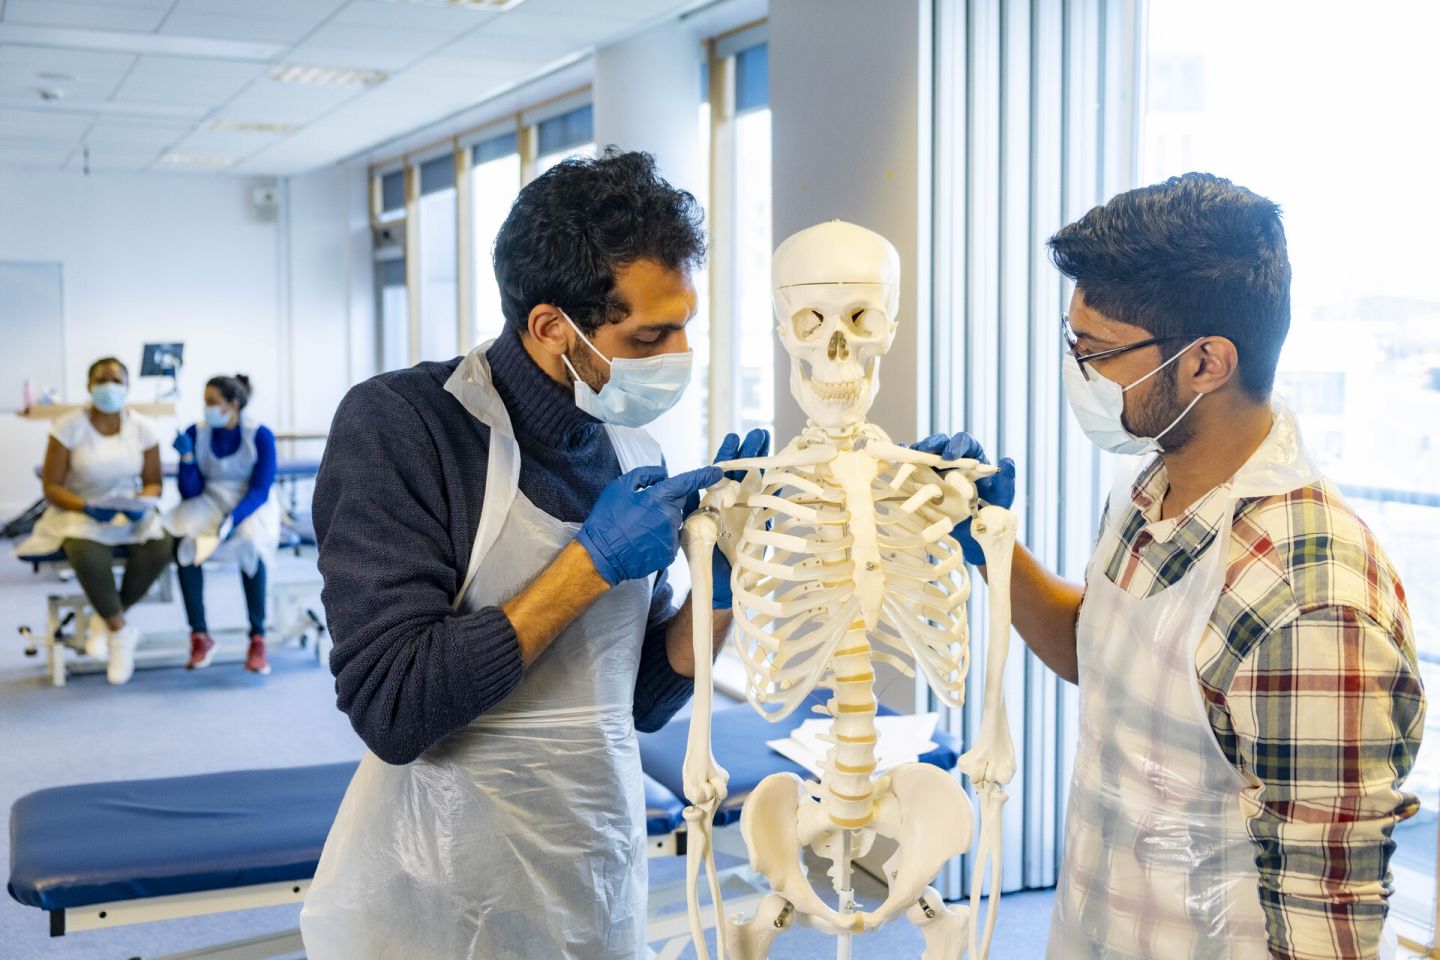 MSc Physiotherapy students in their classroom at Glasgow Caledonian University L-R: Yazeed Qashwa and Kevin Kurian